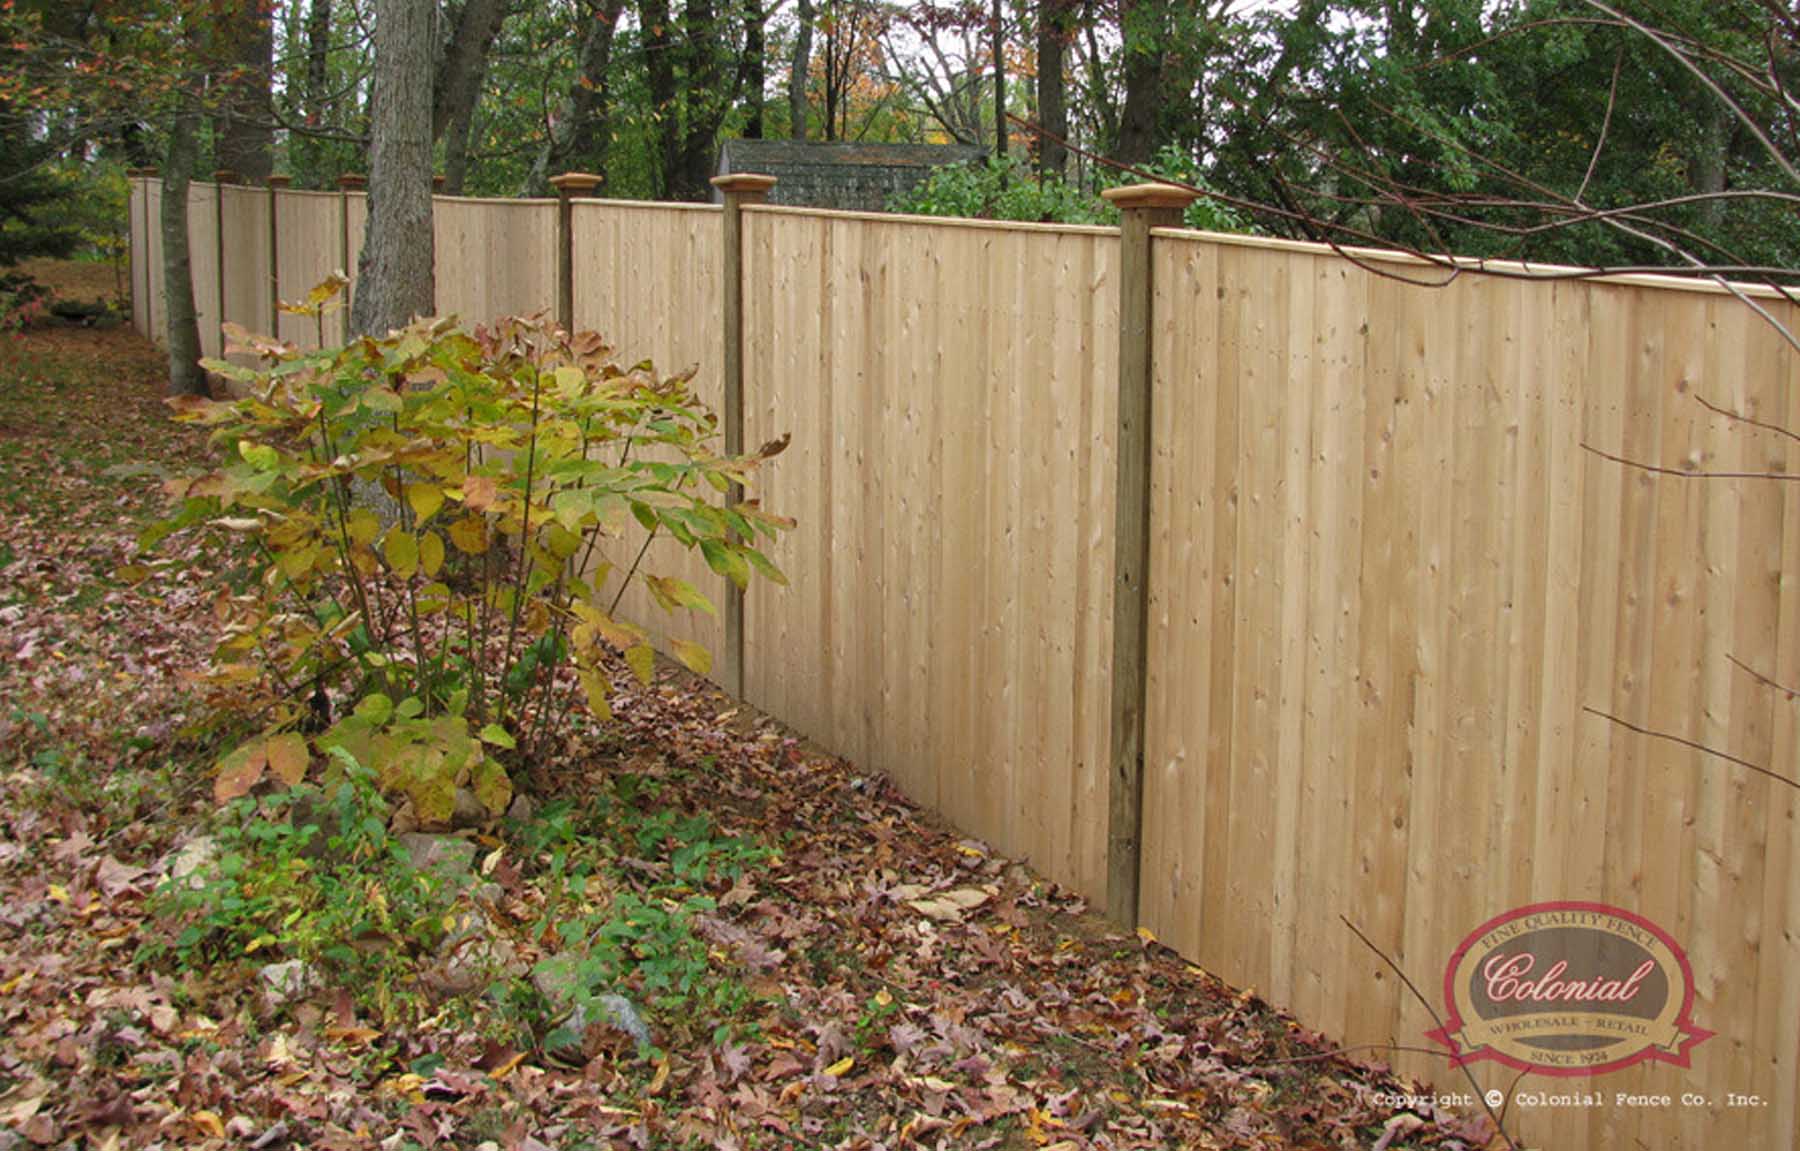 Wood Privacy Screen Fence Installation in Massachusetts - Bottom 3